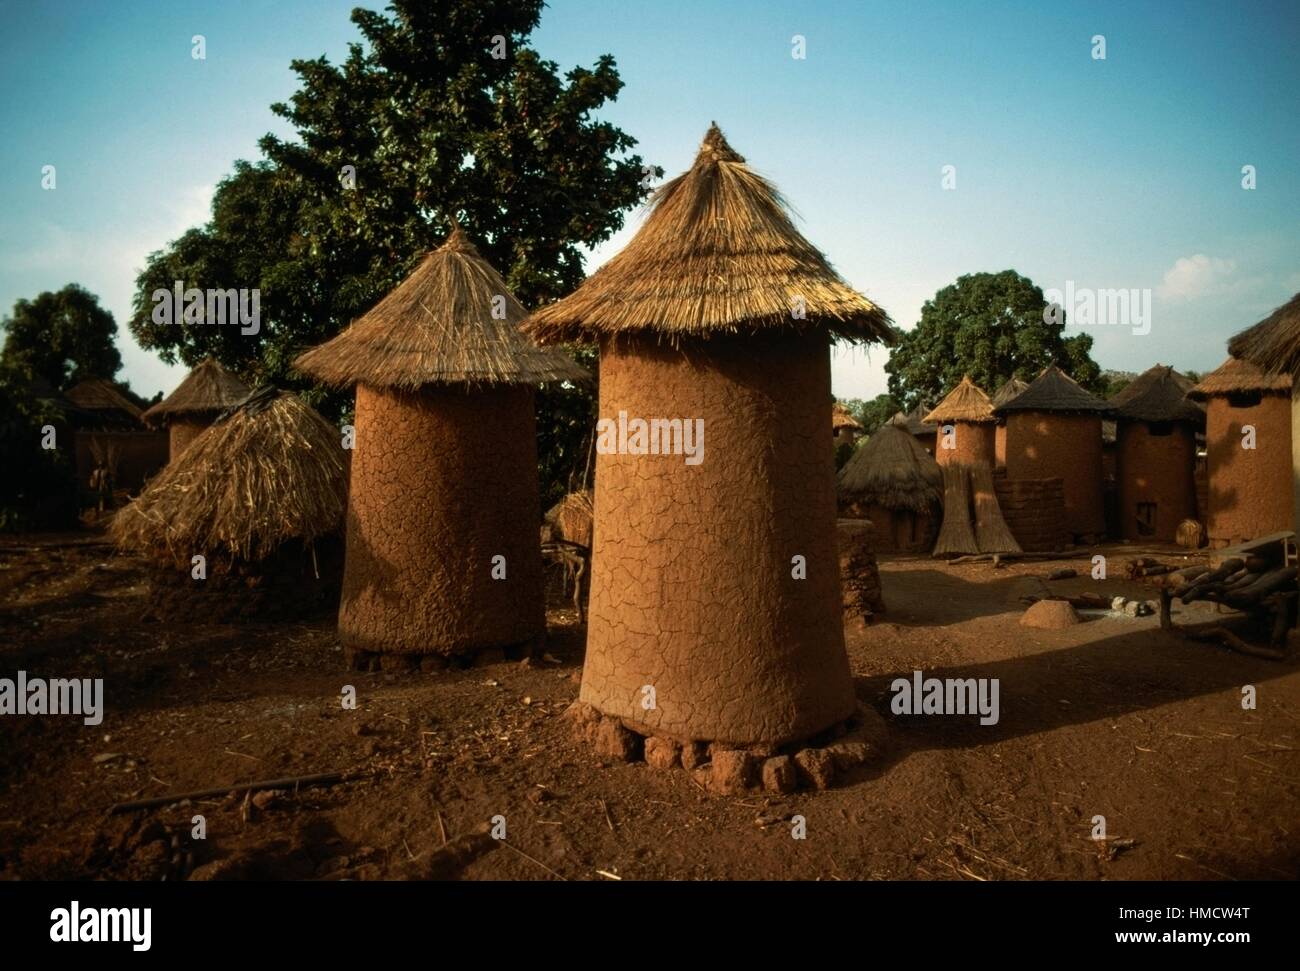 Cylindrical barns with thatched roofs, Senufo village, Ivory Coast. Stock Photo